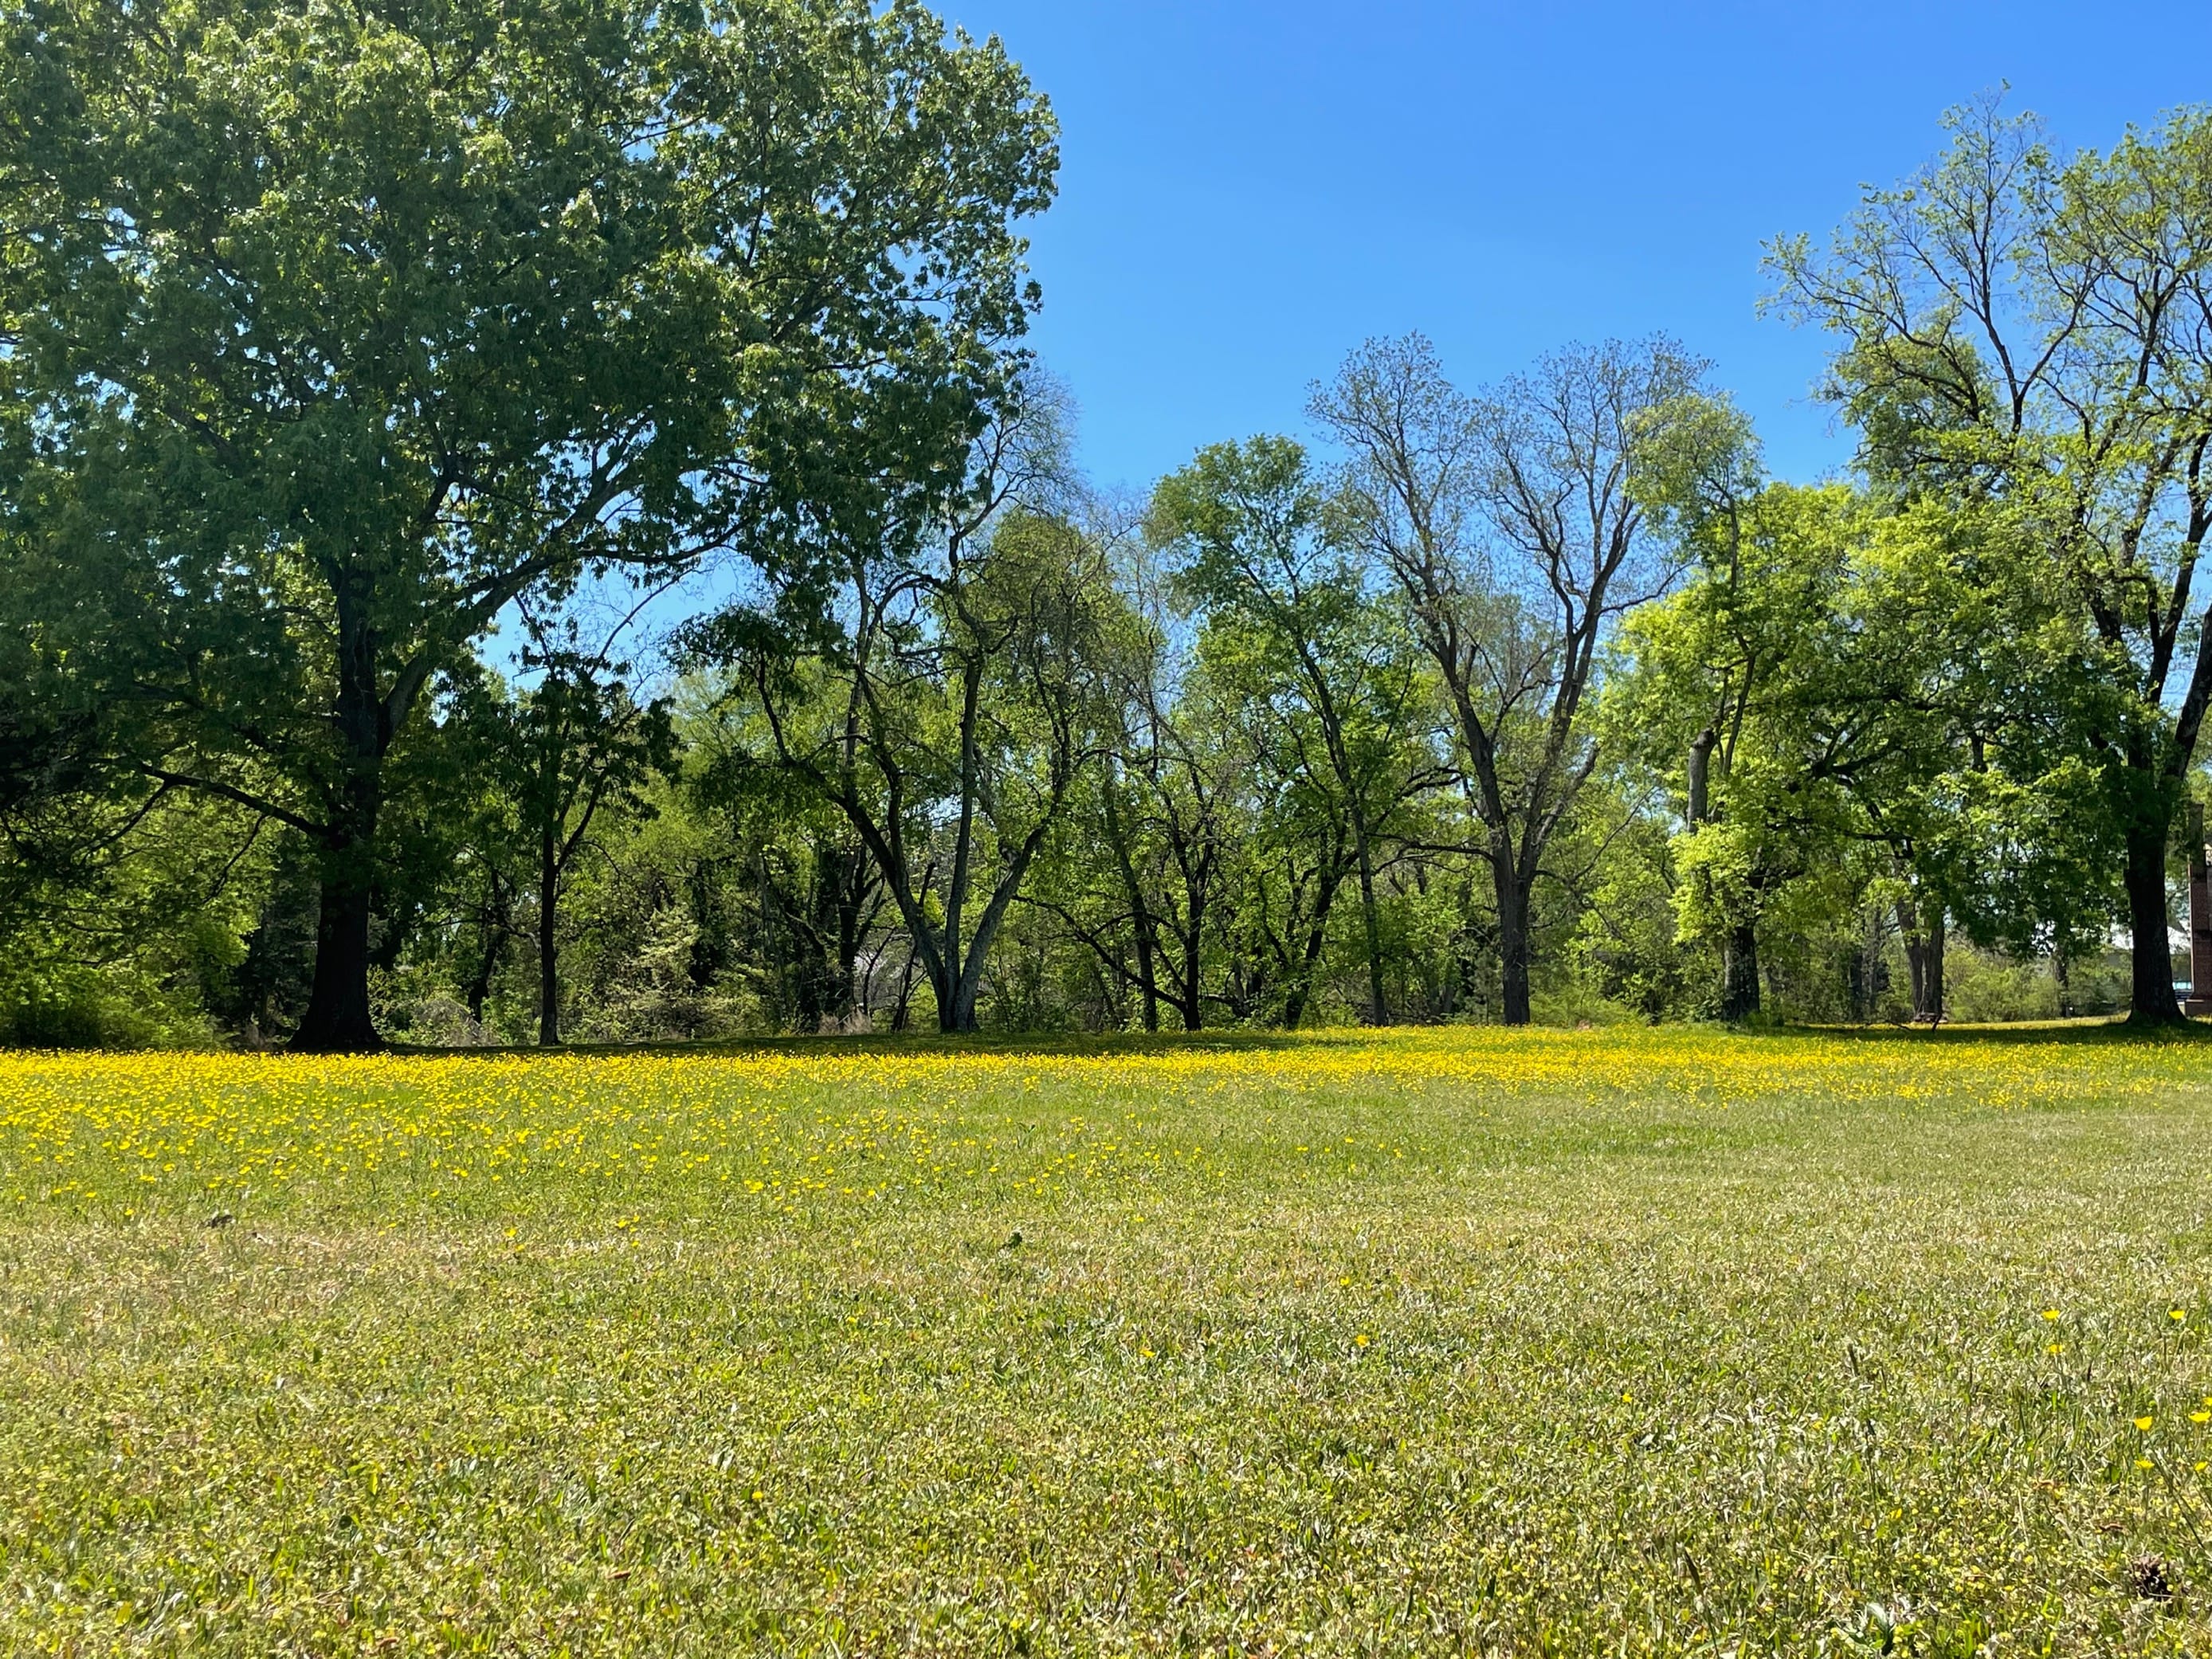 A grassy field filled with yellow flowers, the former site of the Halifax powder magazine